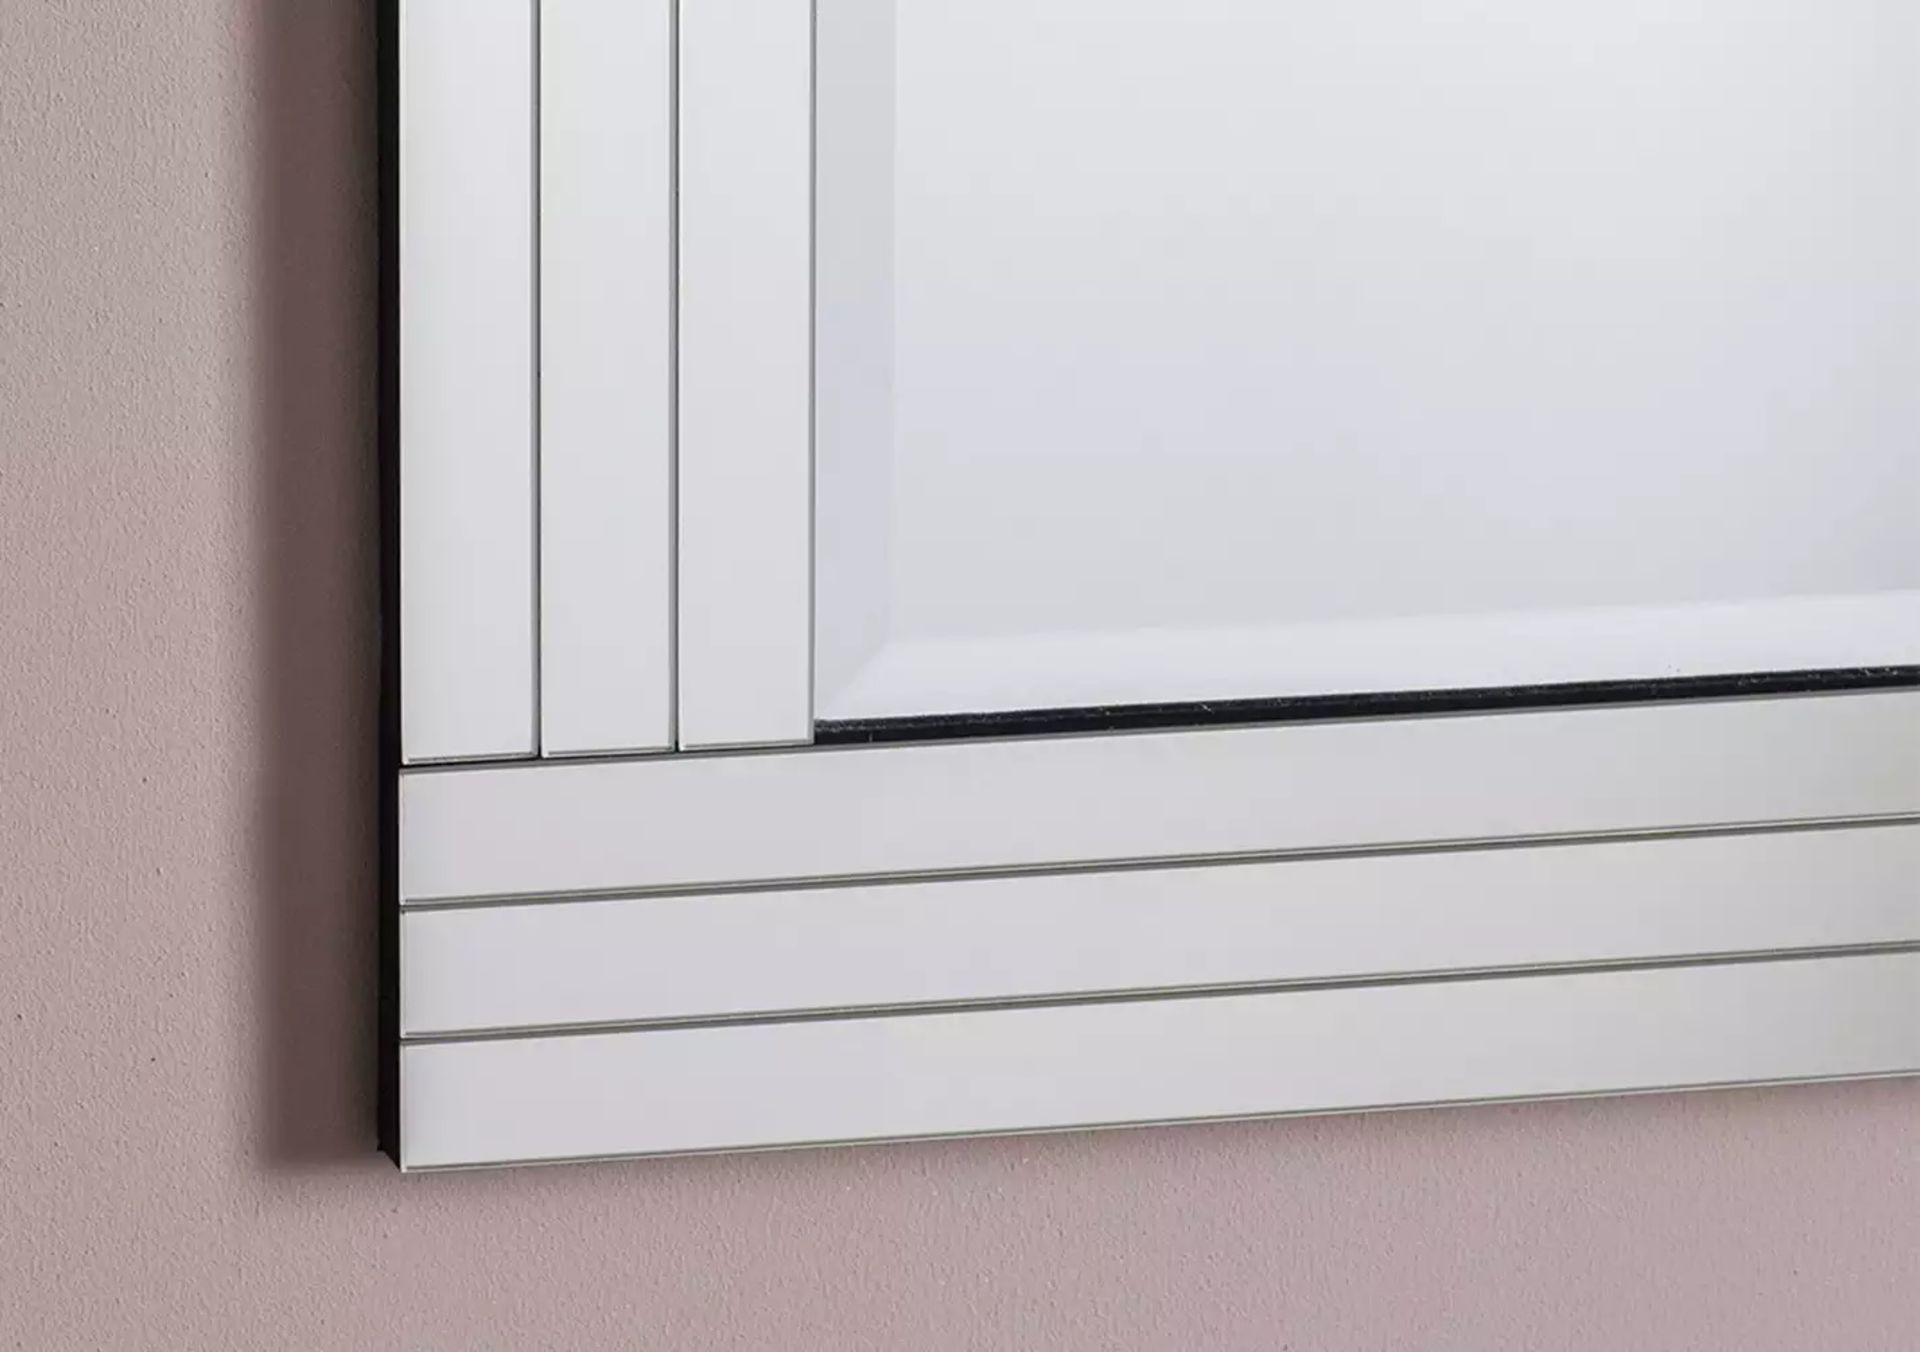 Burnside Accent Mirror The Burnside rectangle mirror is a simple yet effective design that will help - Image 2 of 2